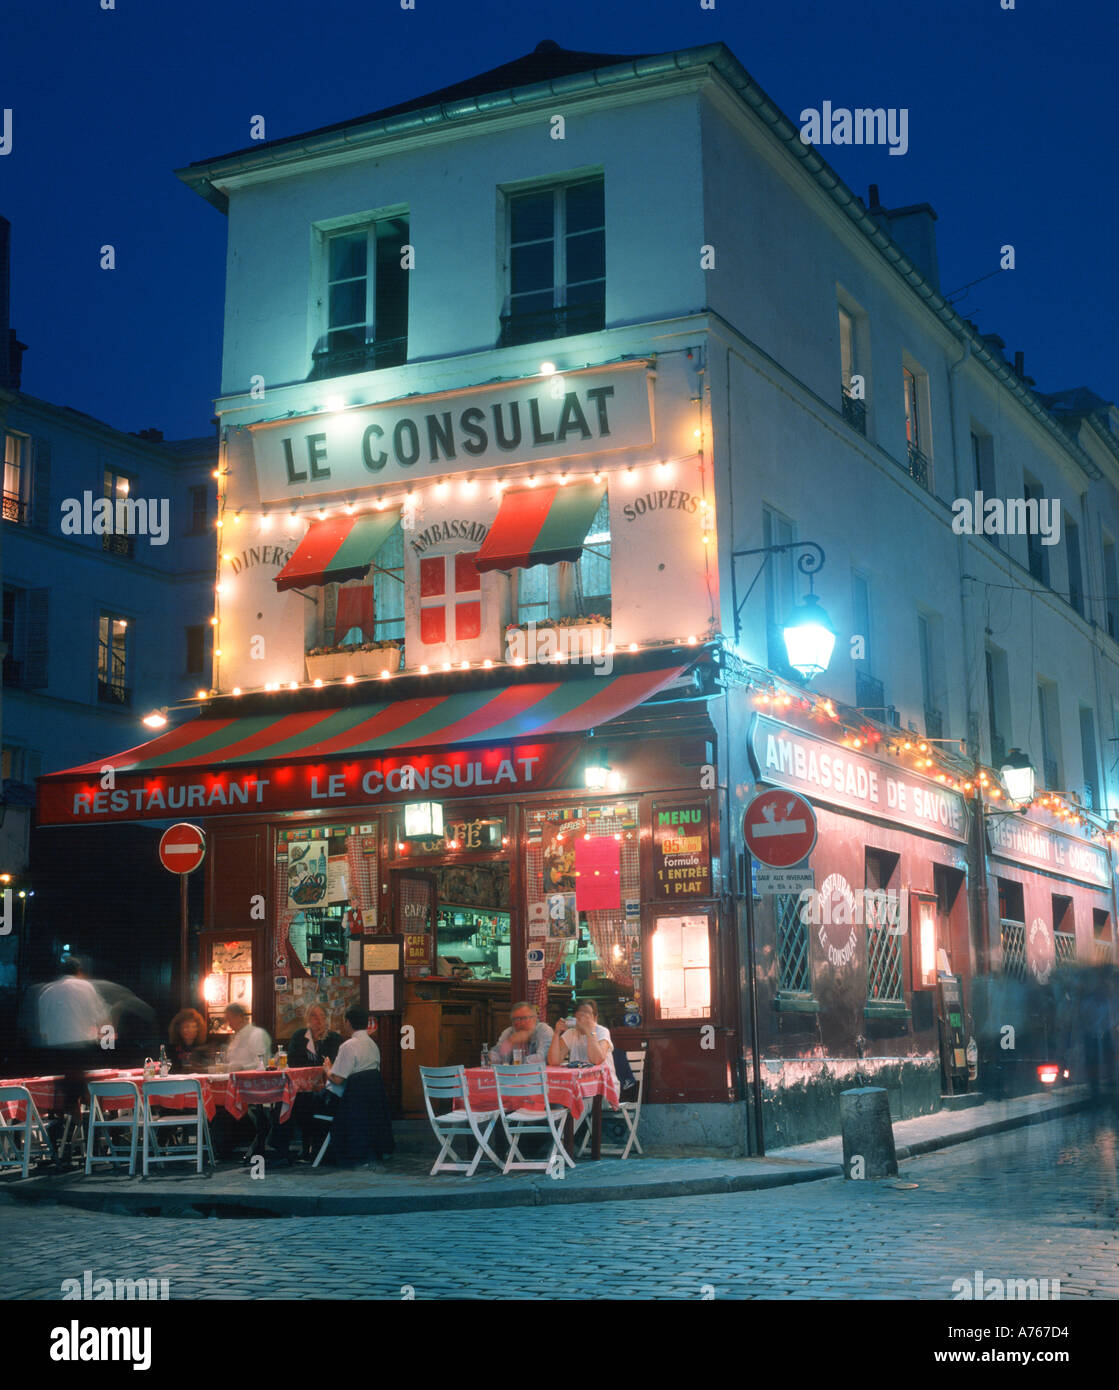 Cafe Le Consulat in Montmartre section of Paris France Stock Photo - Alamy